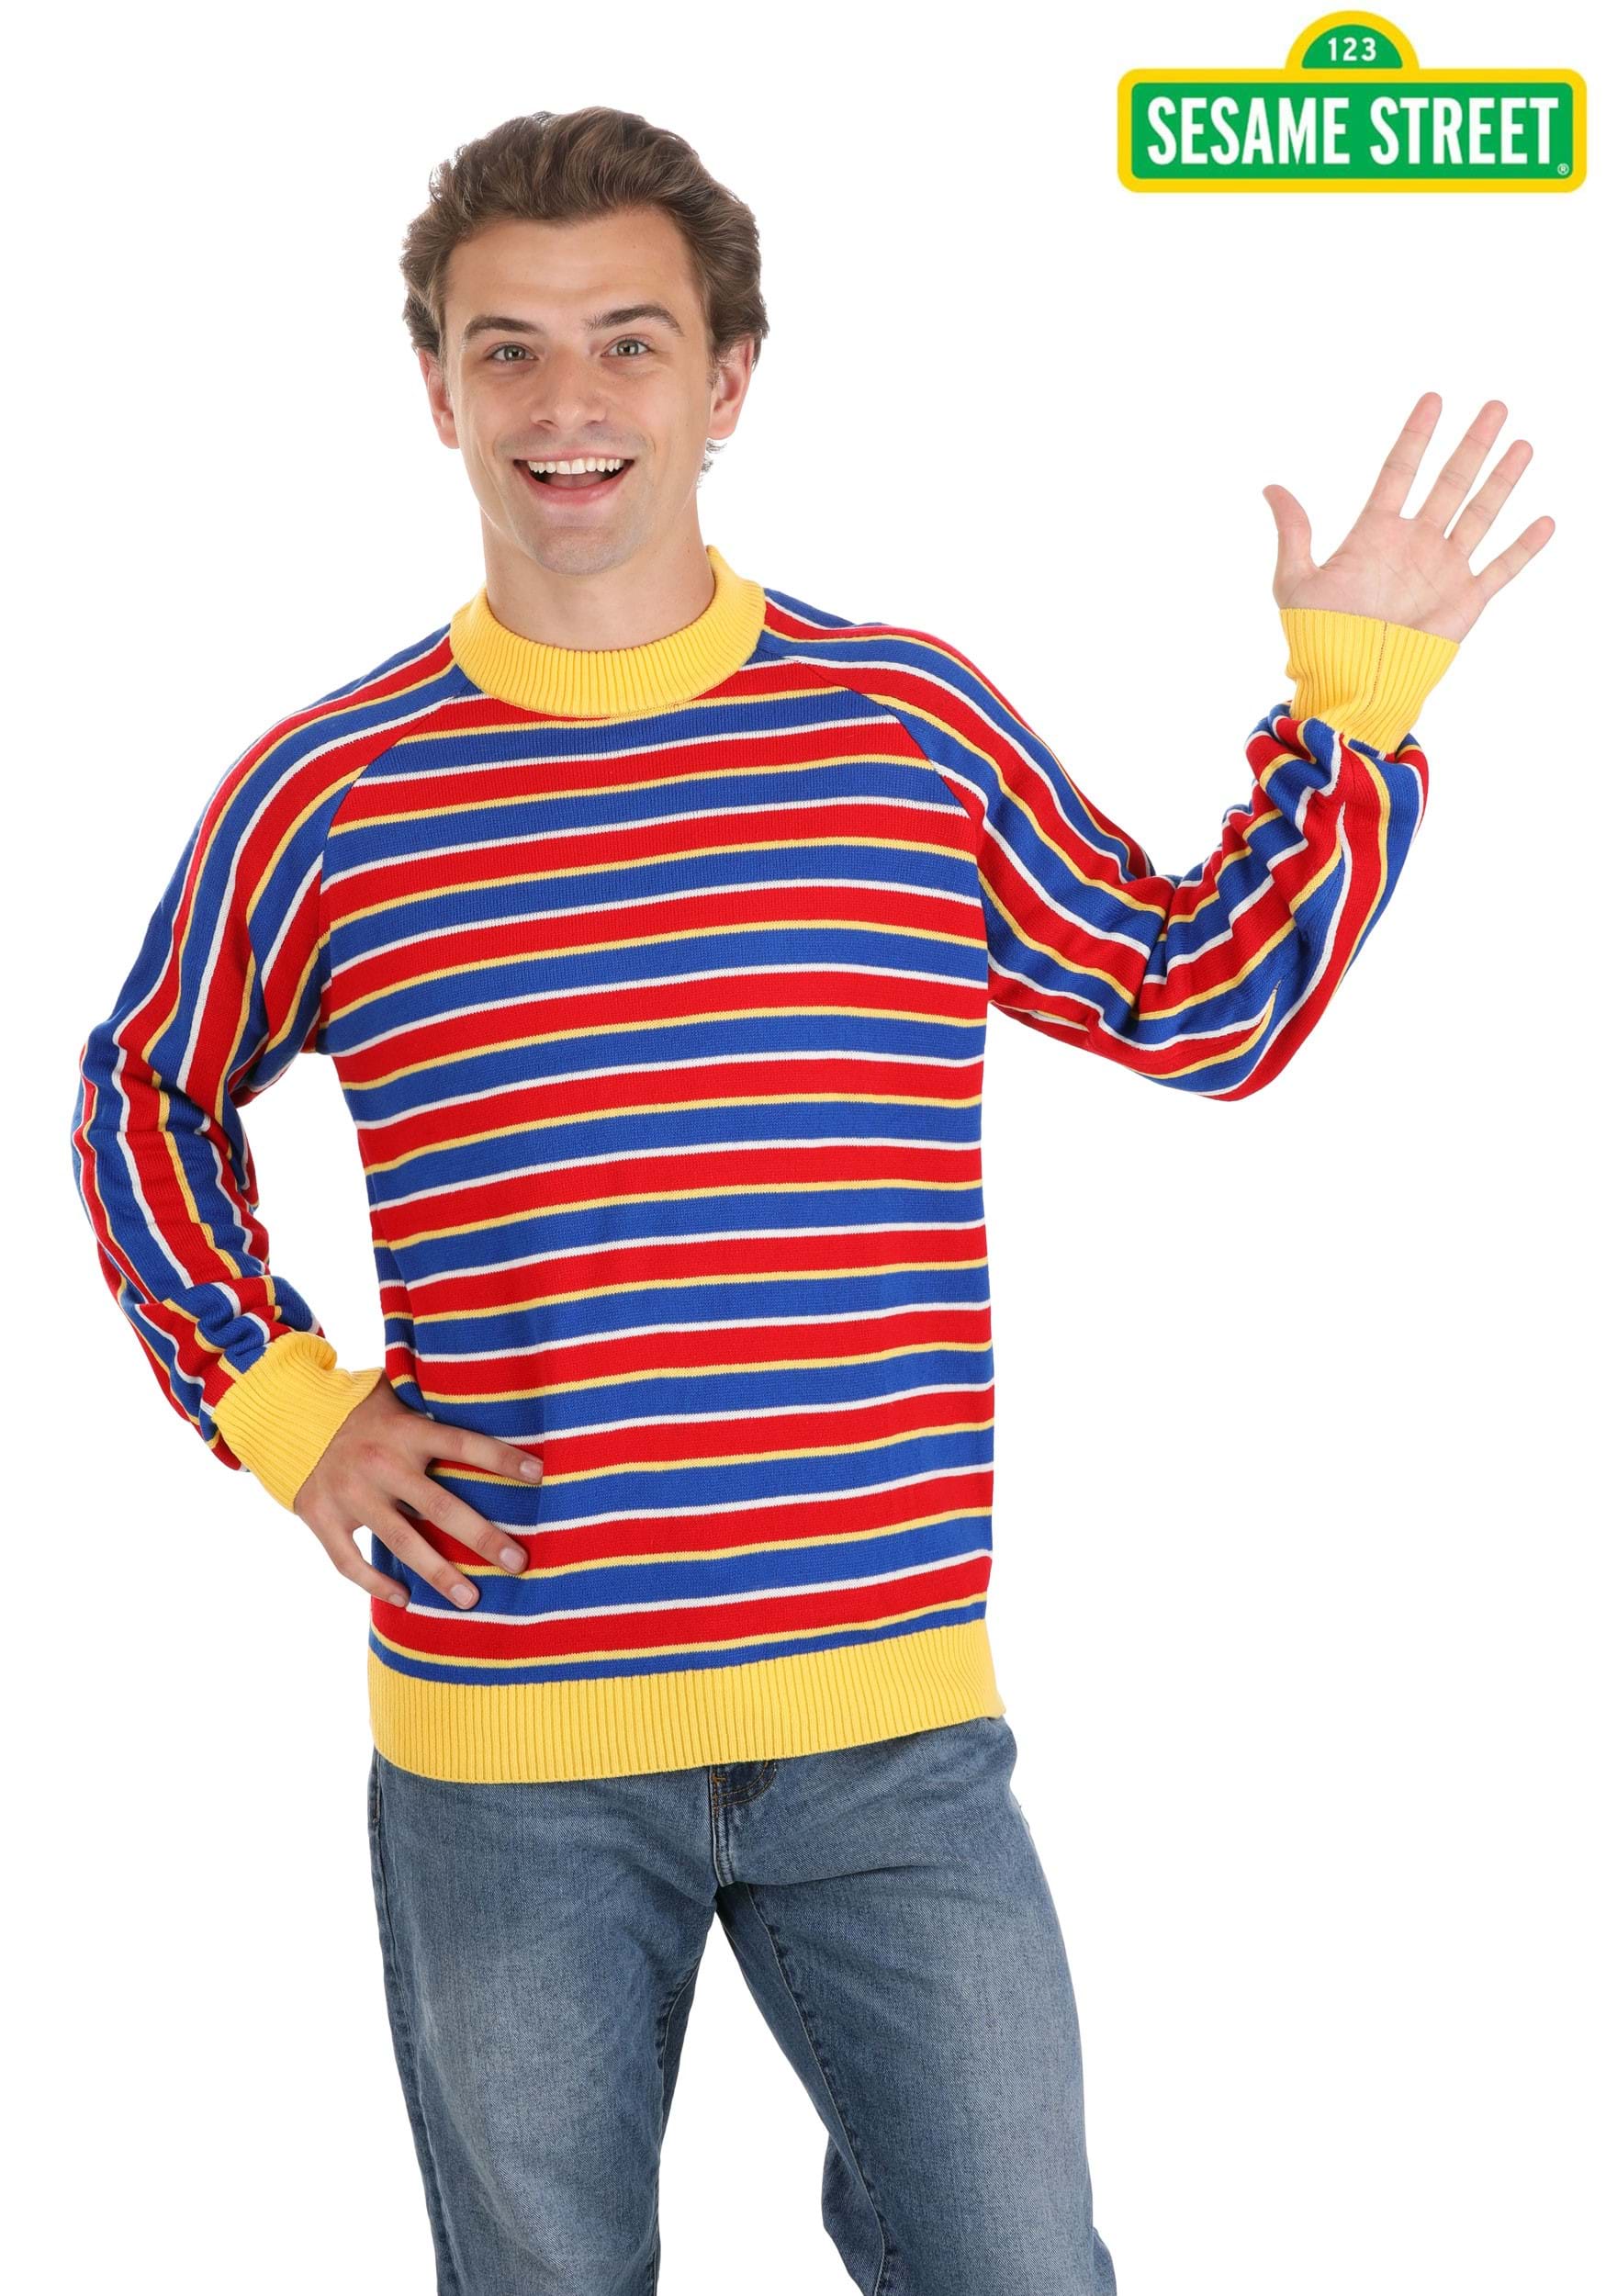 Sesame Street Ernie Cosplay Knit Sweater For Adults